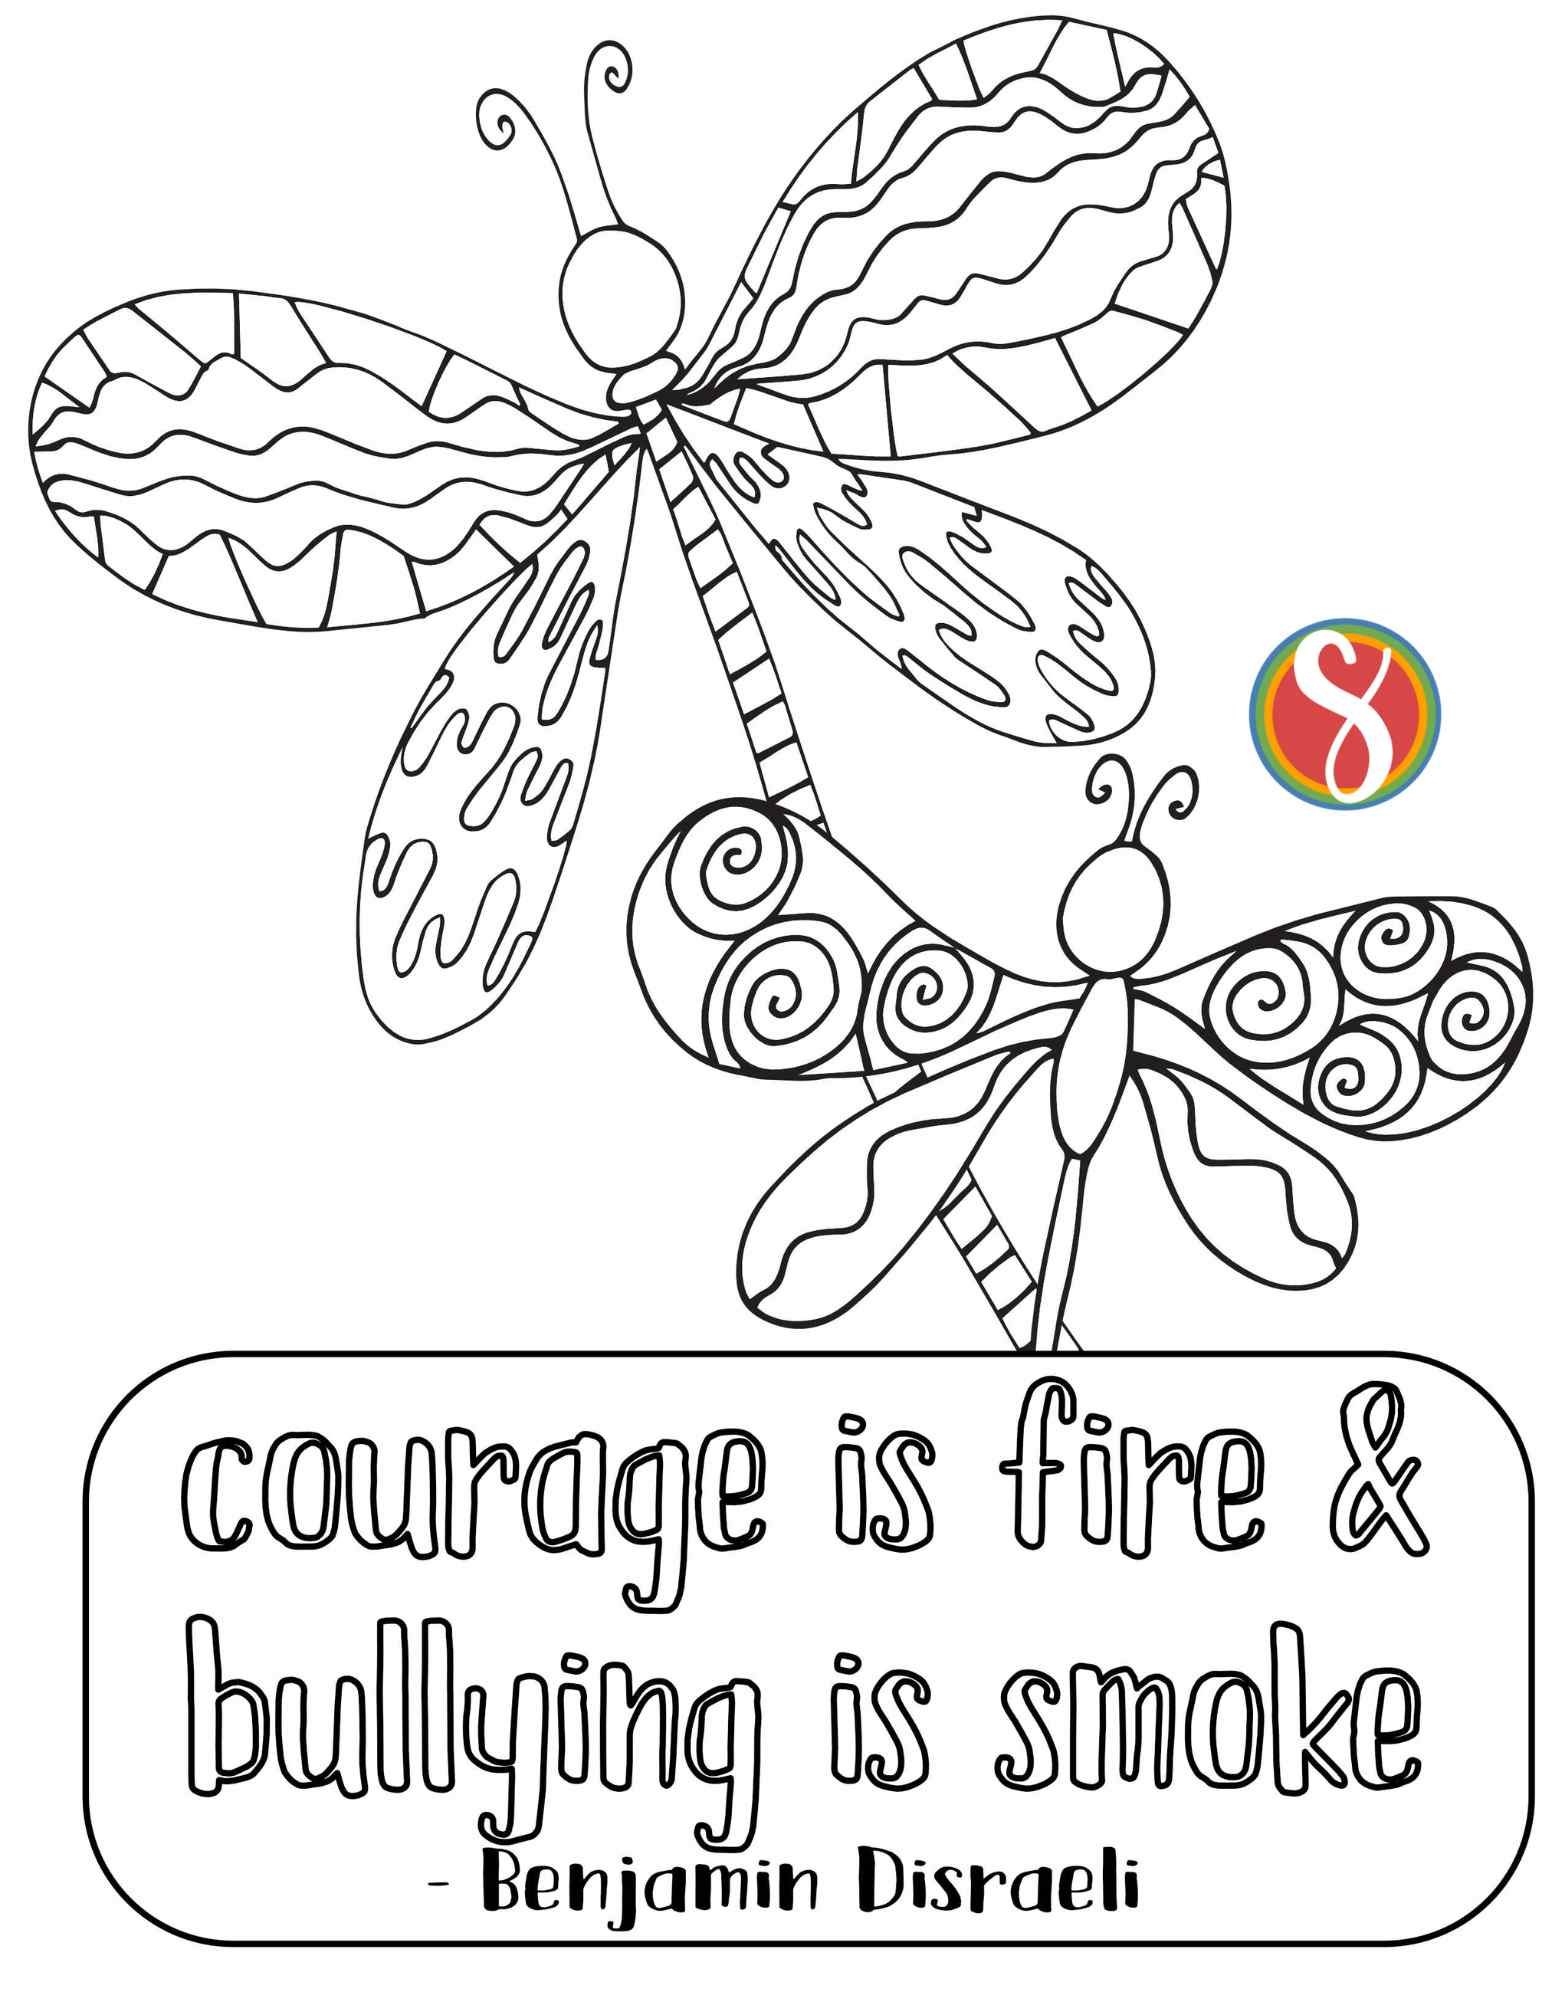 bullying quote on a dragonfly coloring page with two simple dragonflies